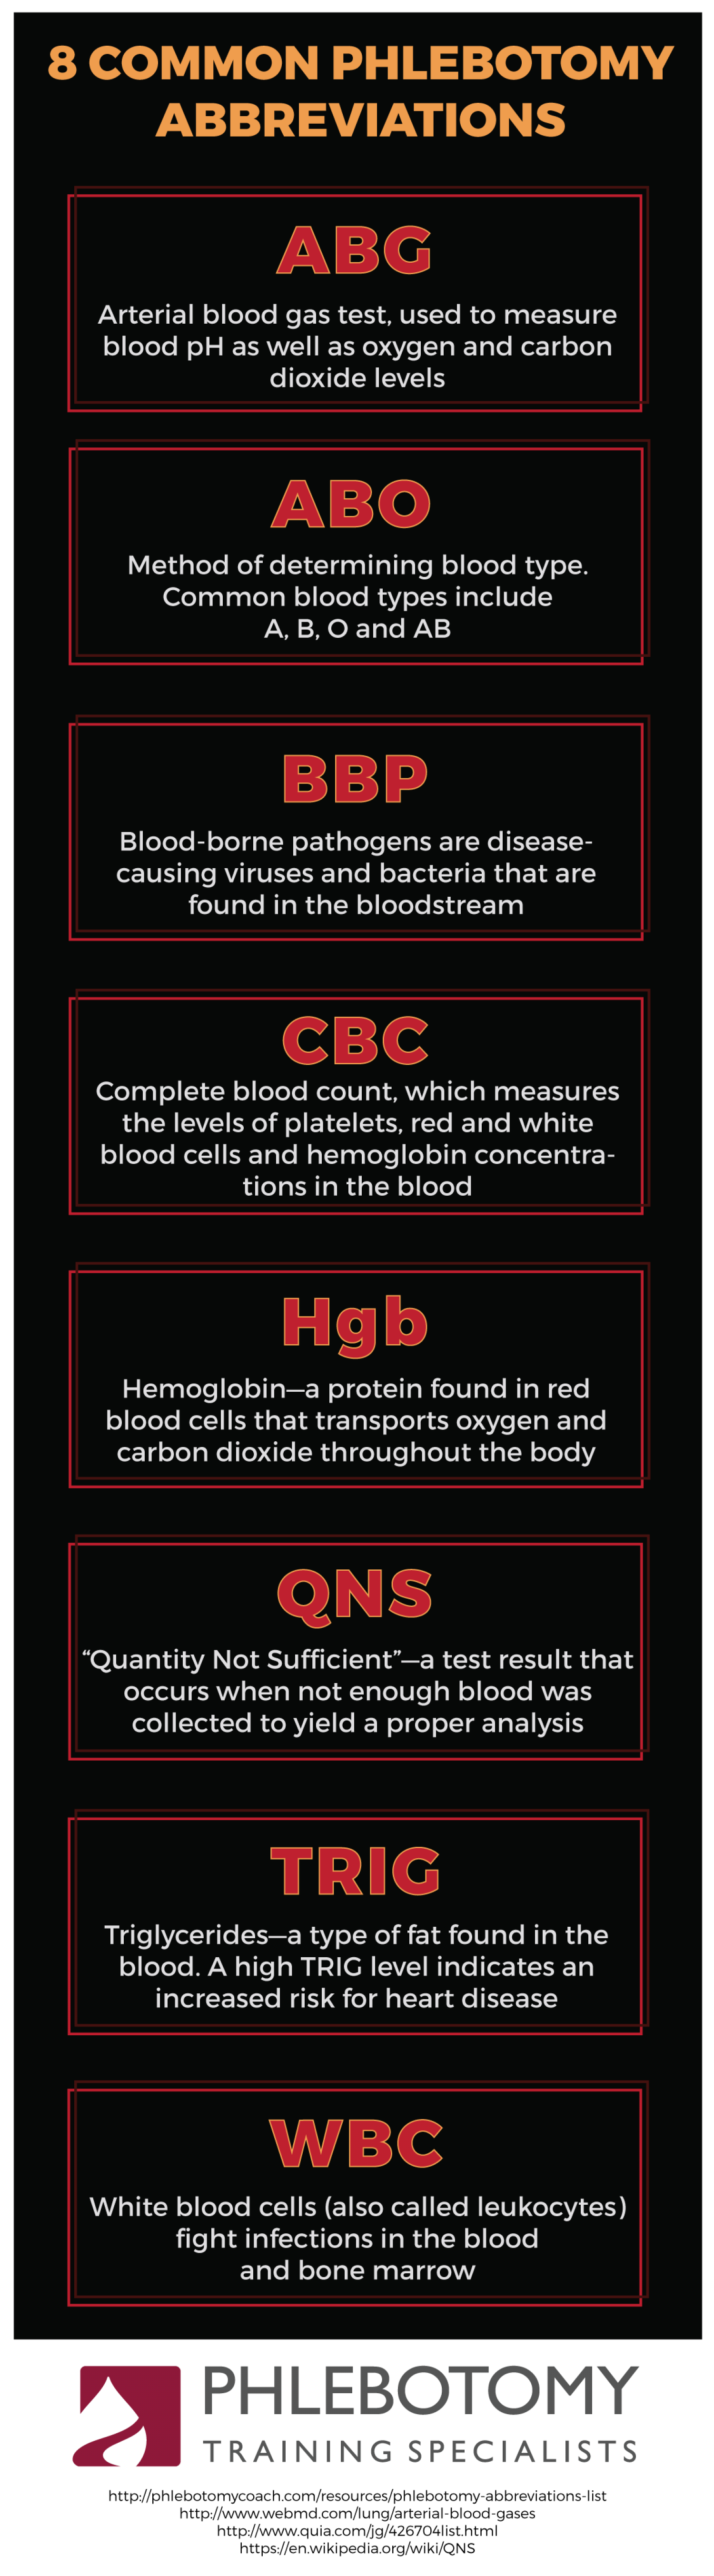 8 Common Phlebotomy Abbreviations Infographic